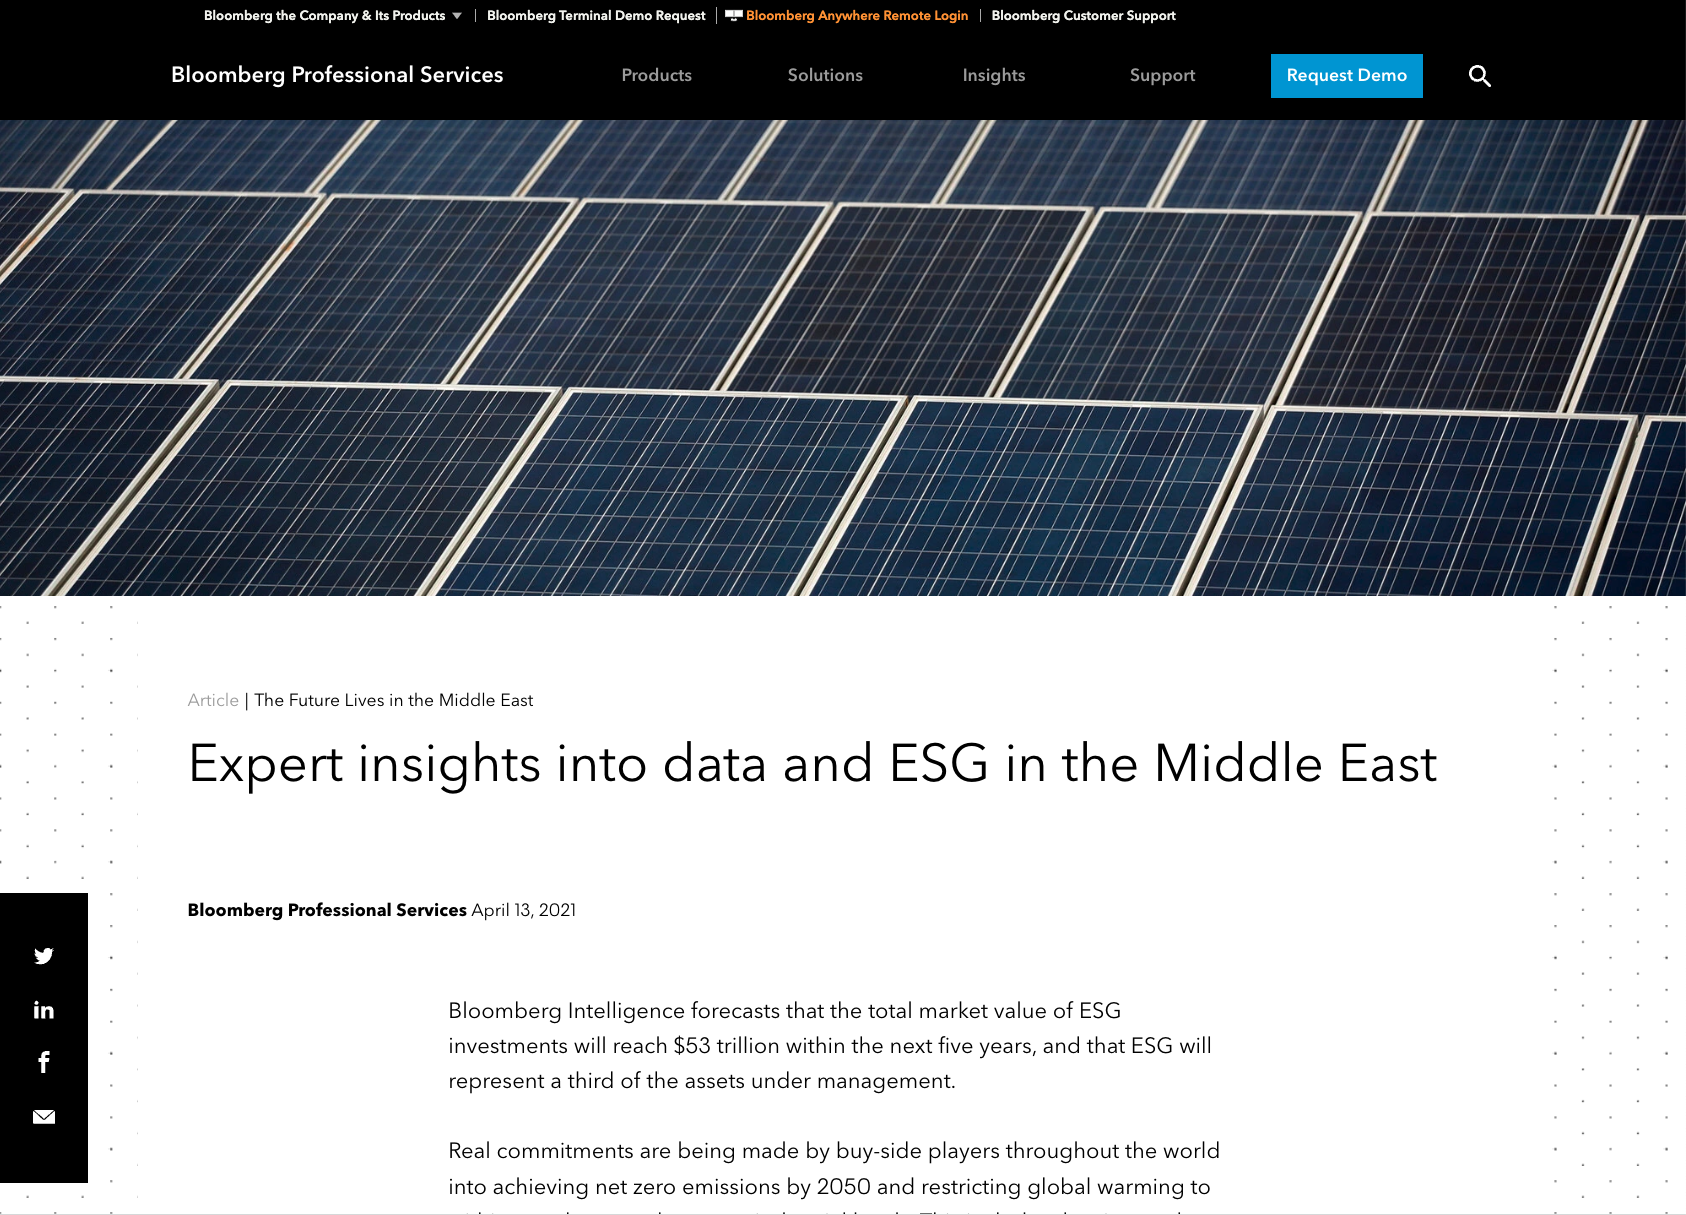 Expert insights into data and ESG in the Middle East